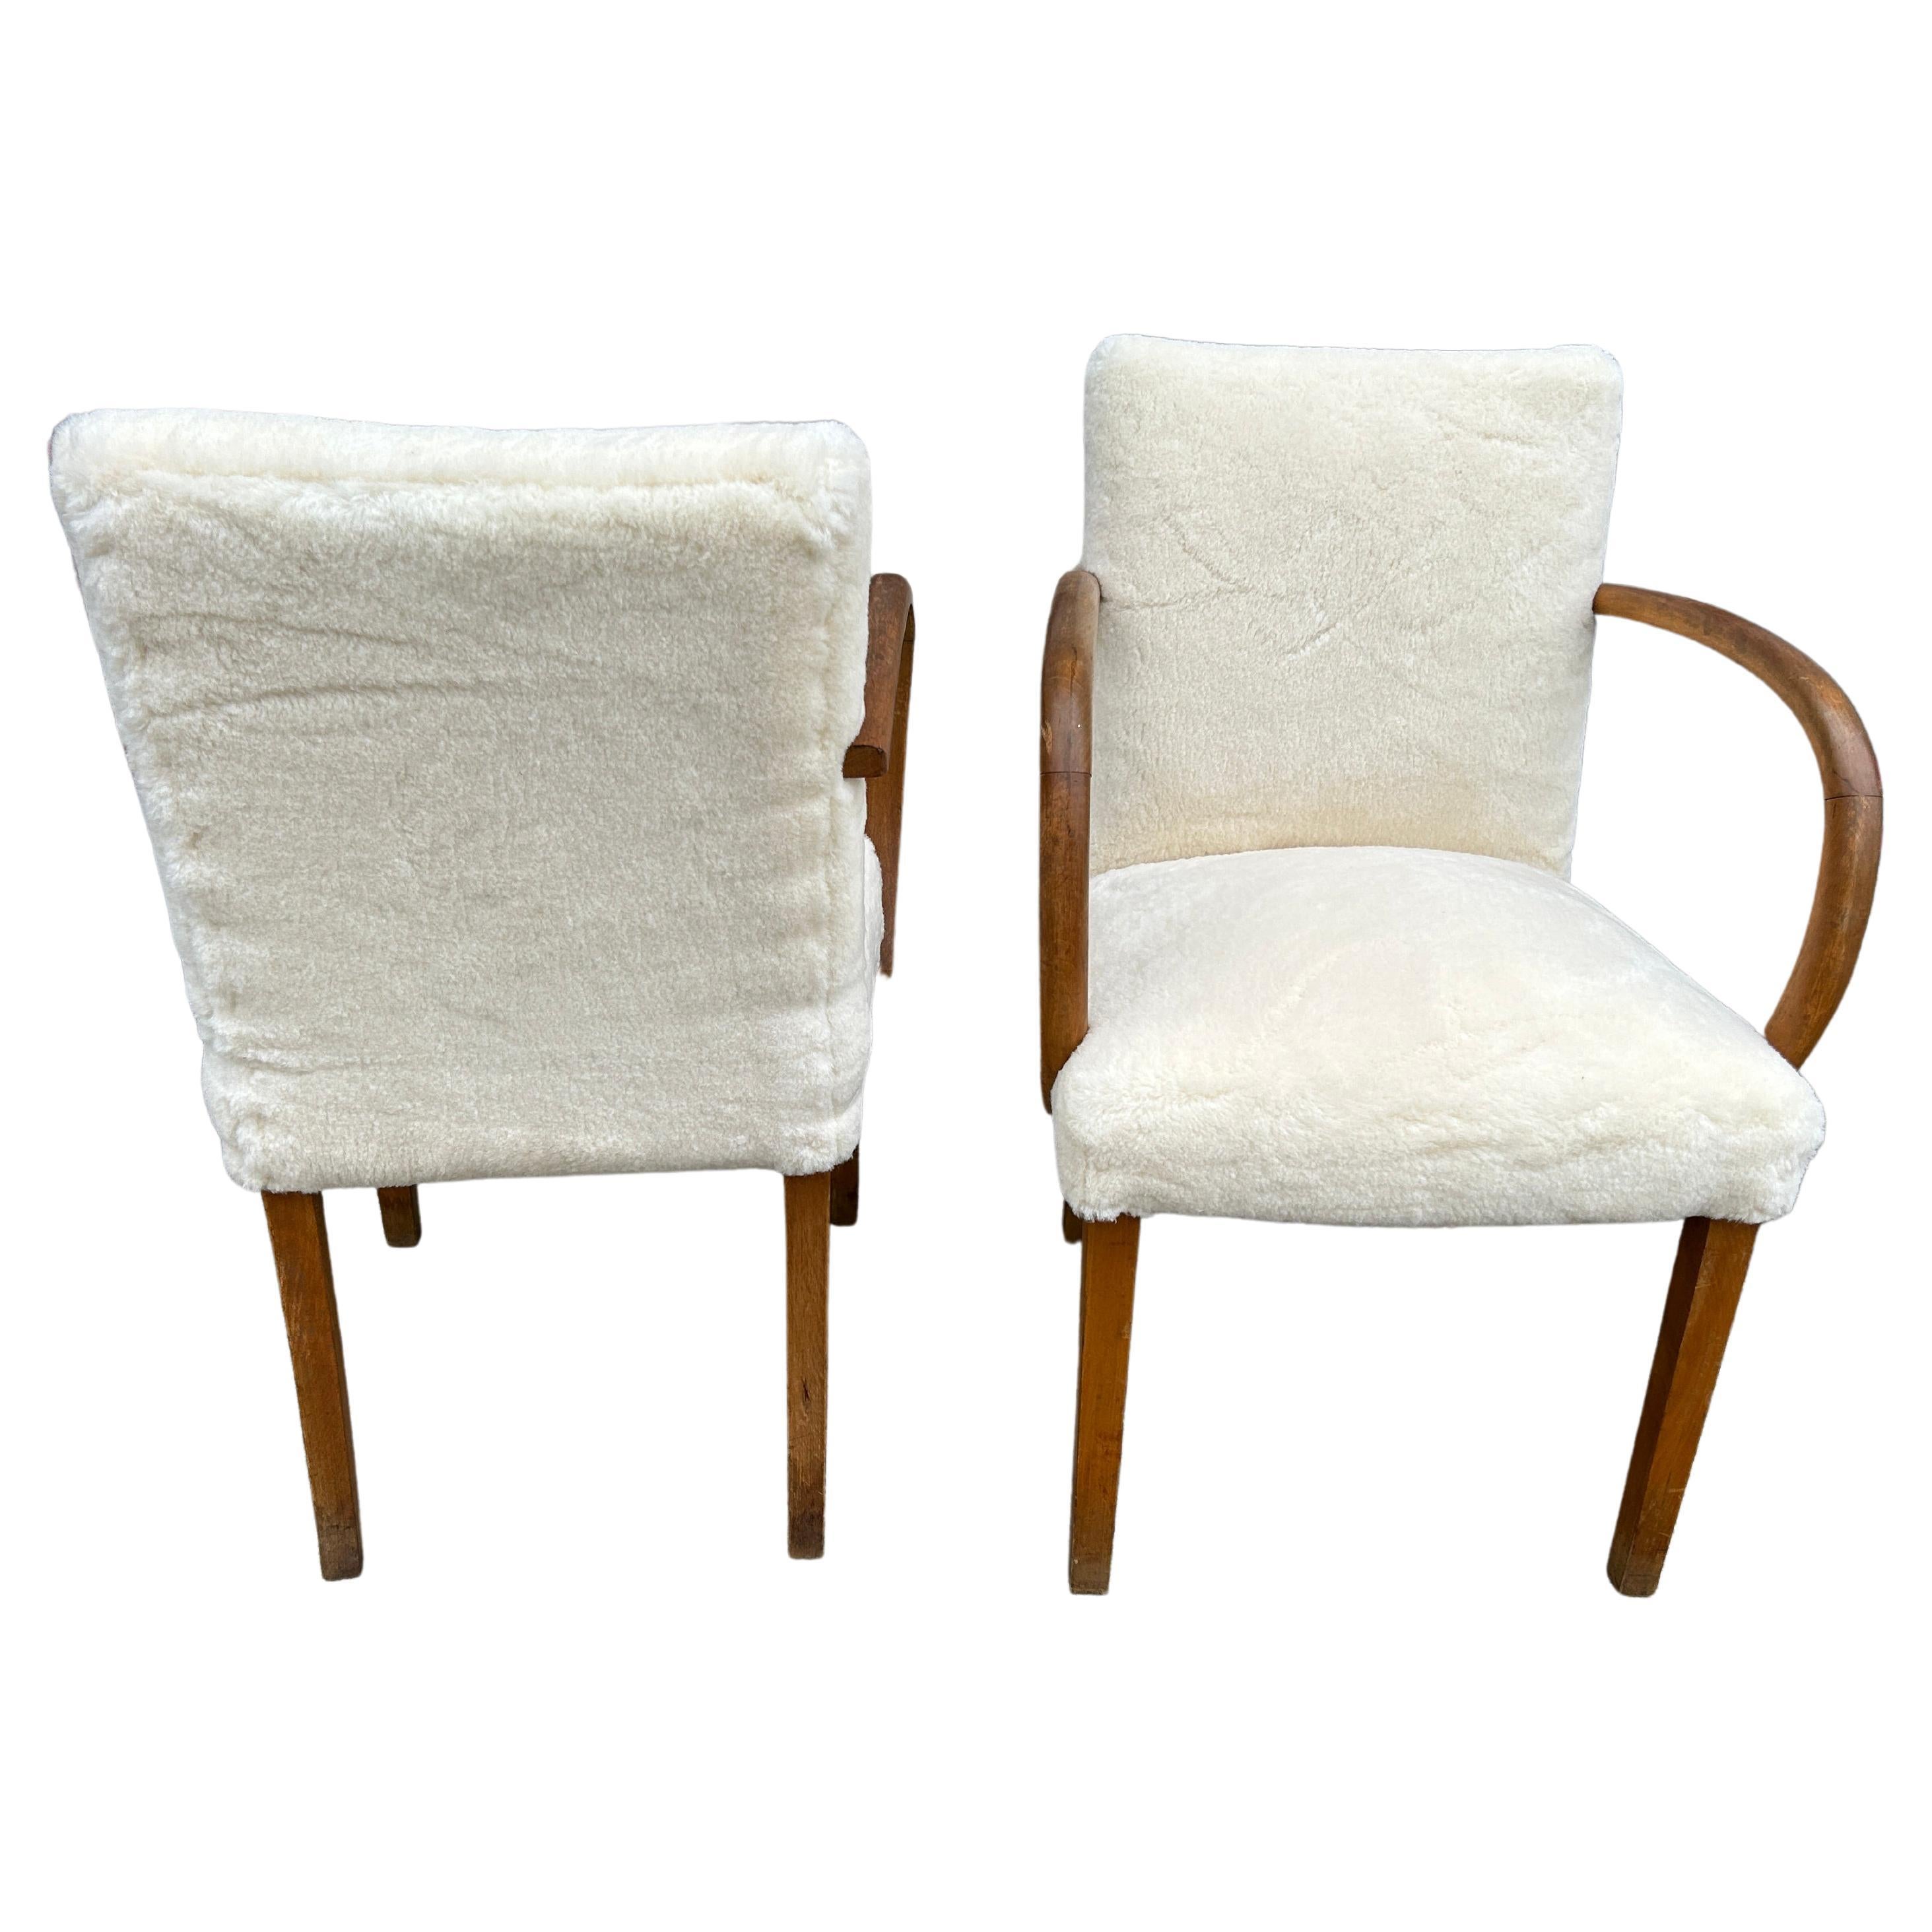 Scandinavian Modern pair of curved armchairs with white Sherpa wool upholstery. Beautiful design circa 1950. Made in Sweden. Located in Brooklyn NYC.

Chairs are being sold as a pair (2) chairs

Dimensions 21” W x 28” D x 33.5” H
Seat Height